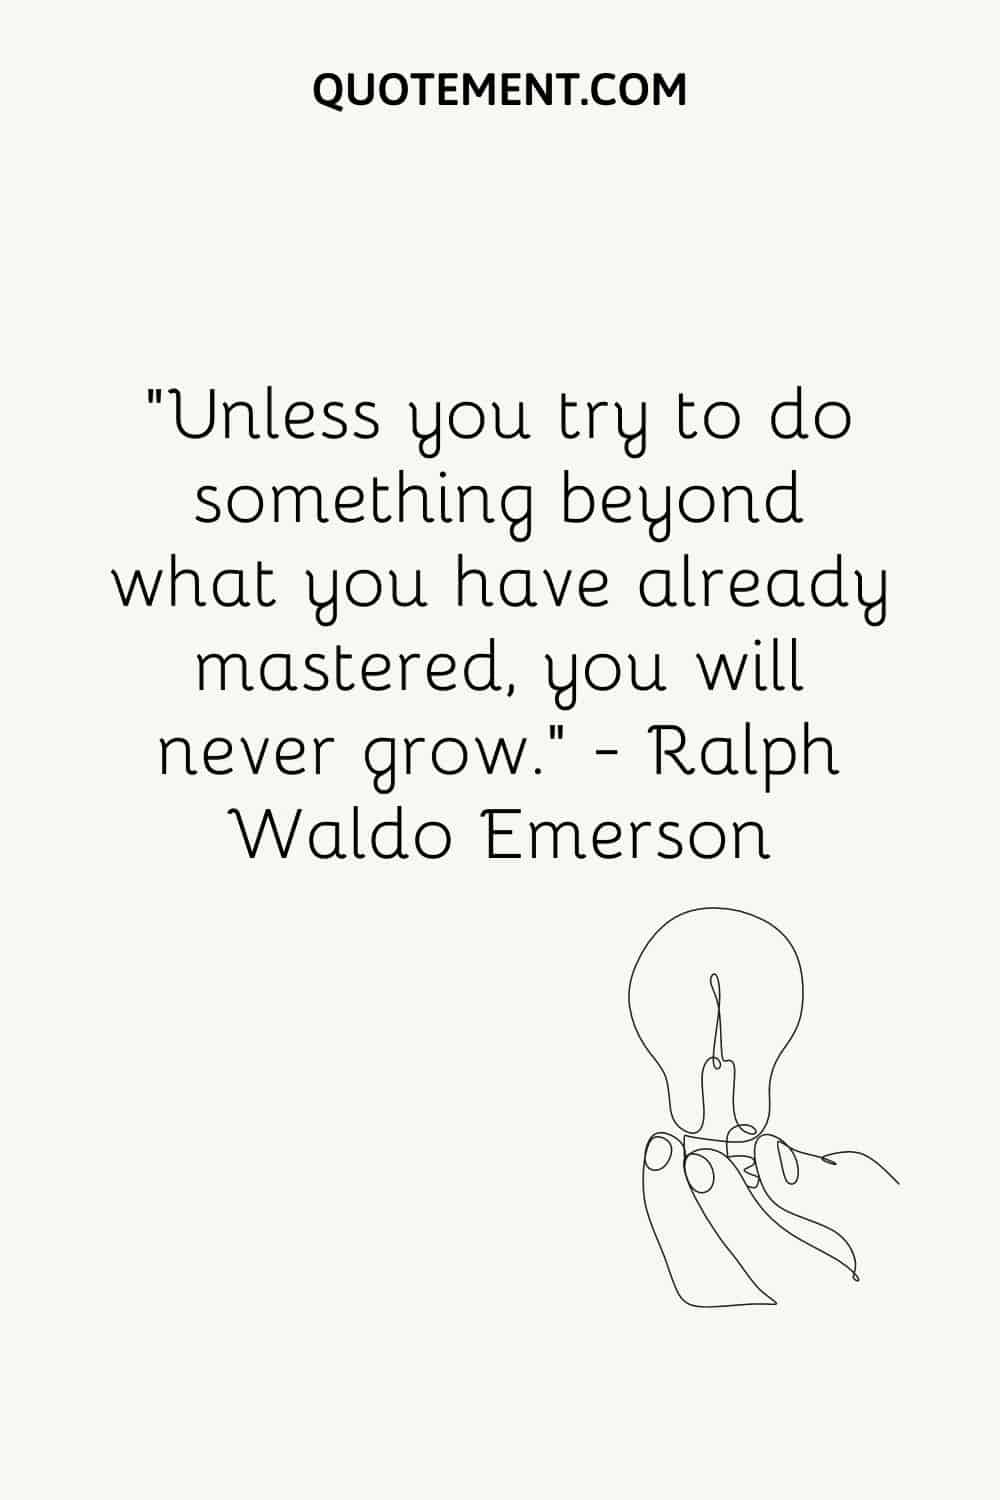 Unless you try to do something beyond what you have already mastered, you will never grow